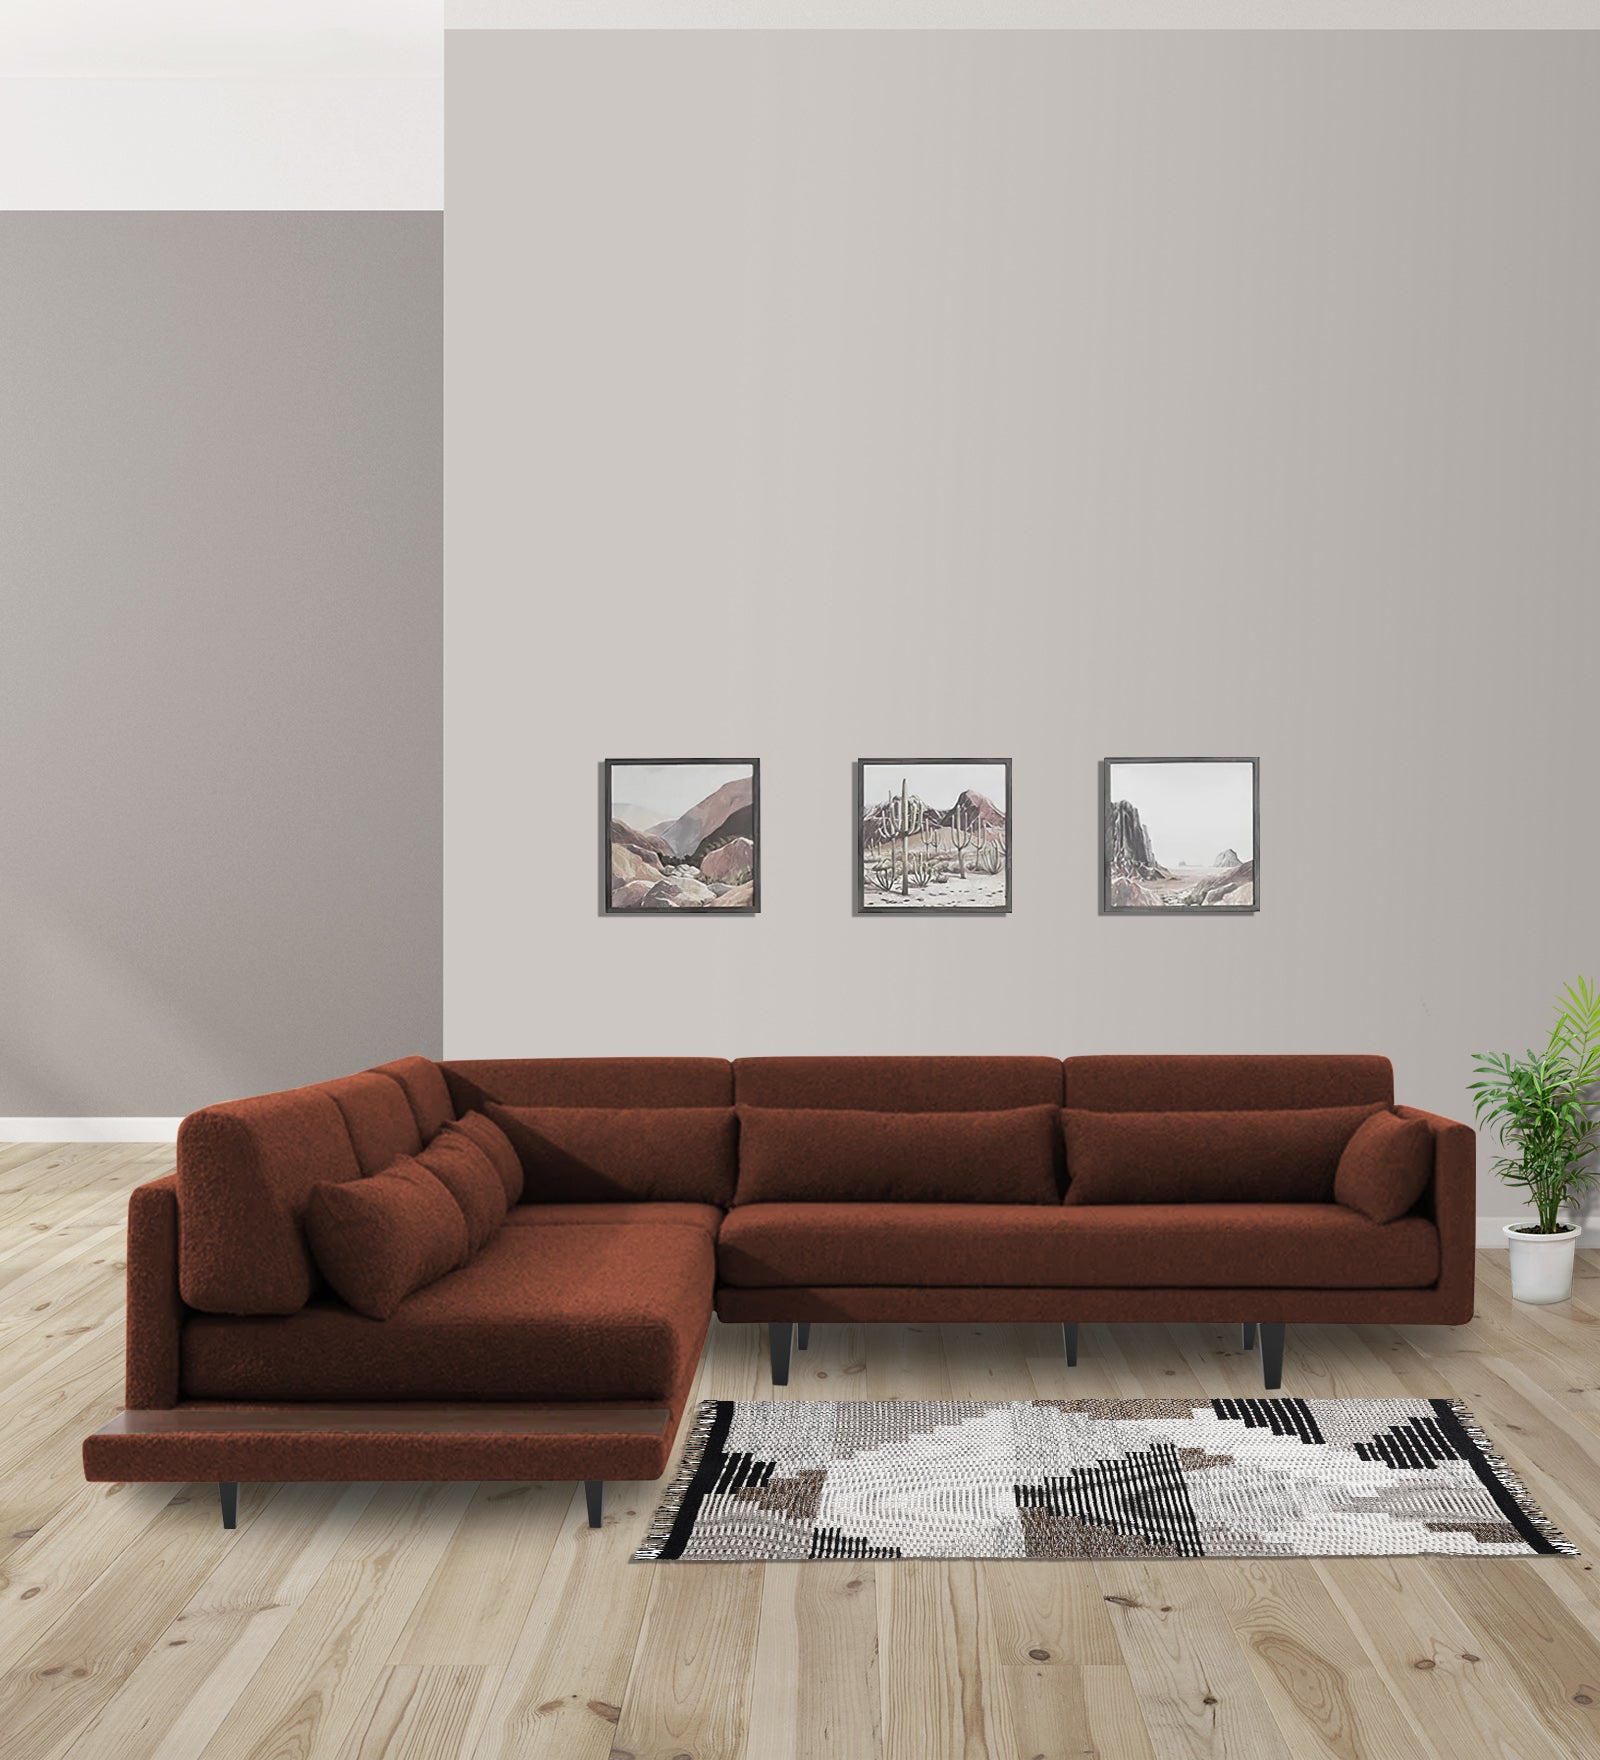 Malta Fabric 6 Seater RHS Sectional Sofa In Coffee brown Colour